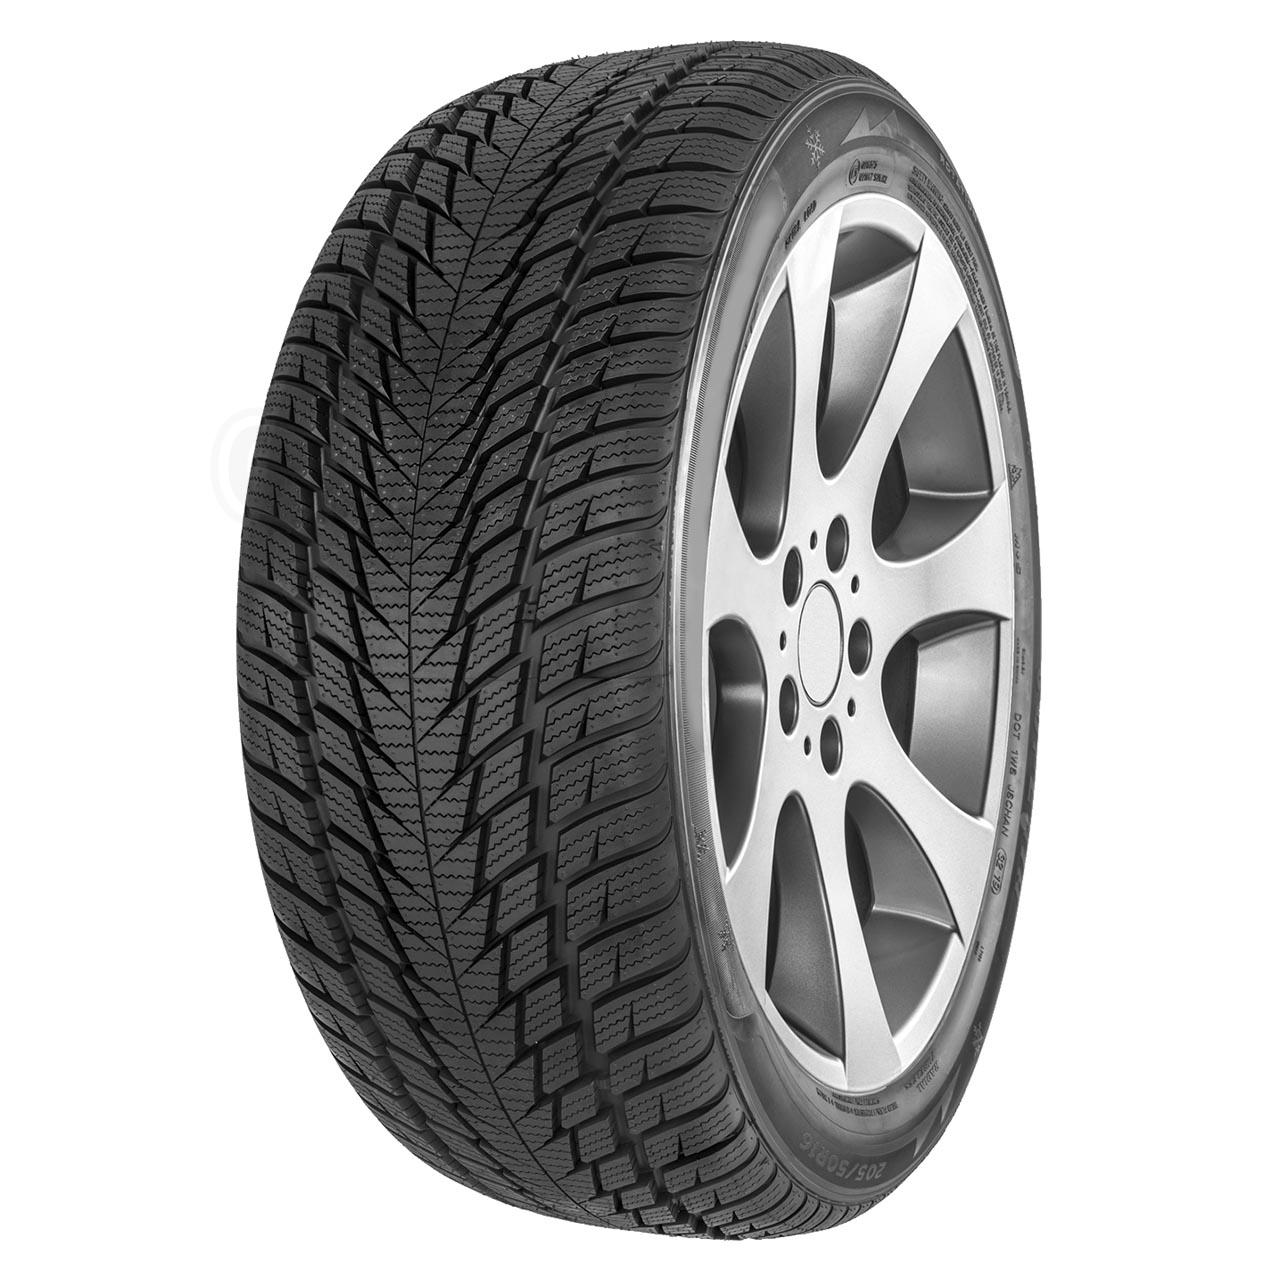 Fortuna Gowin UHP 2 245/45R17 99V XL